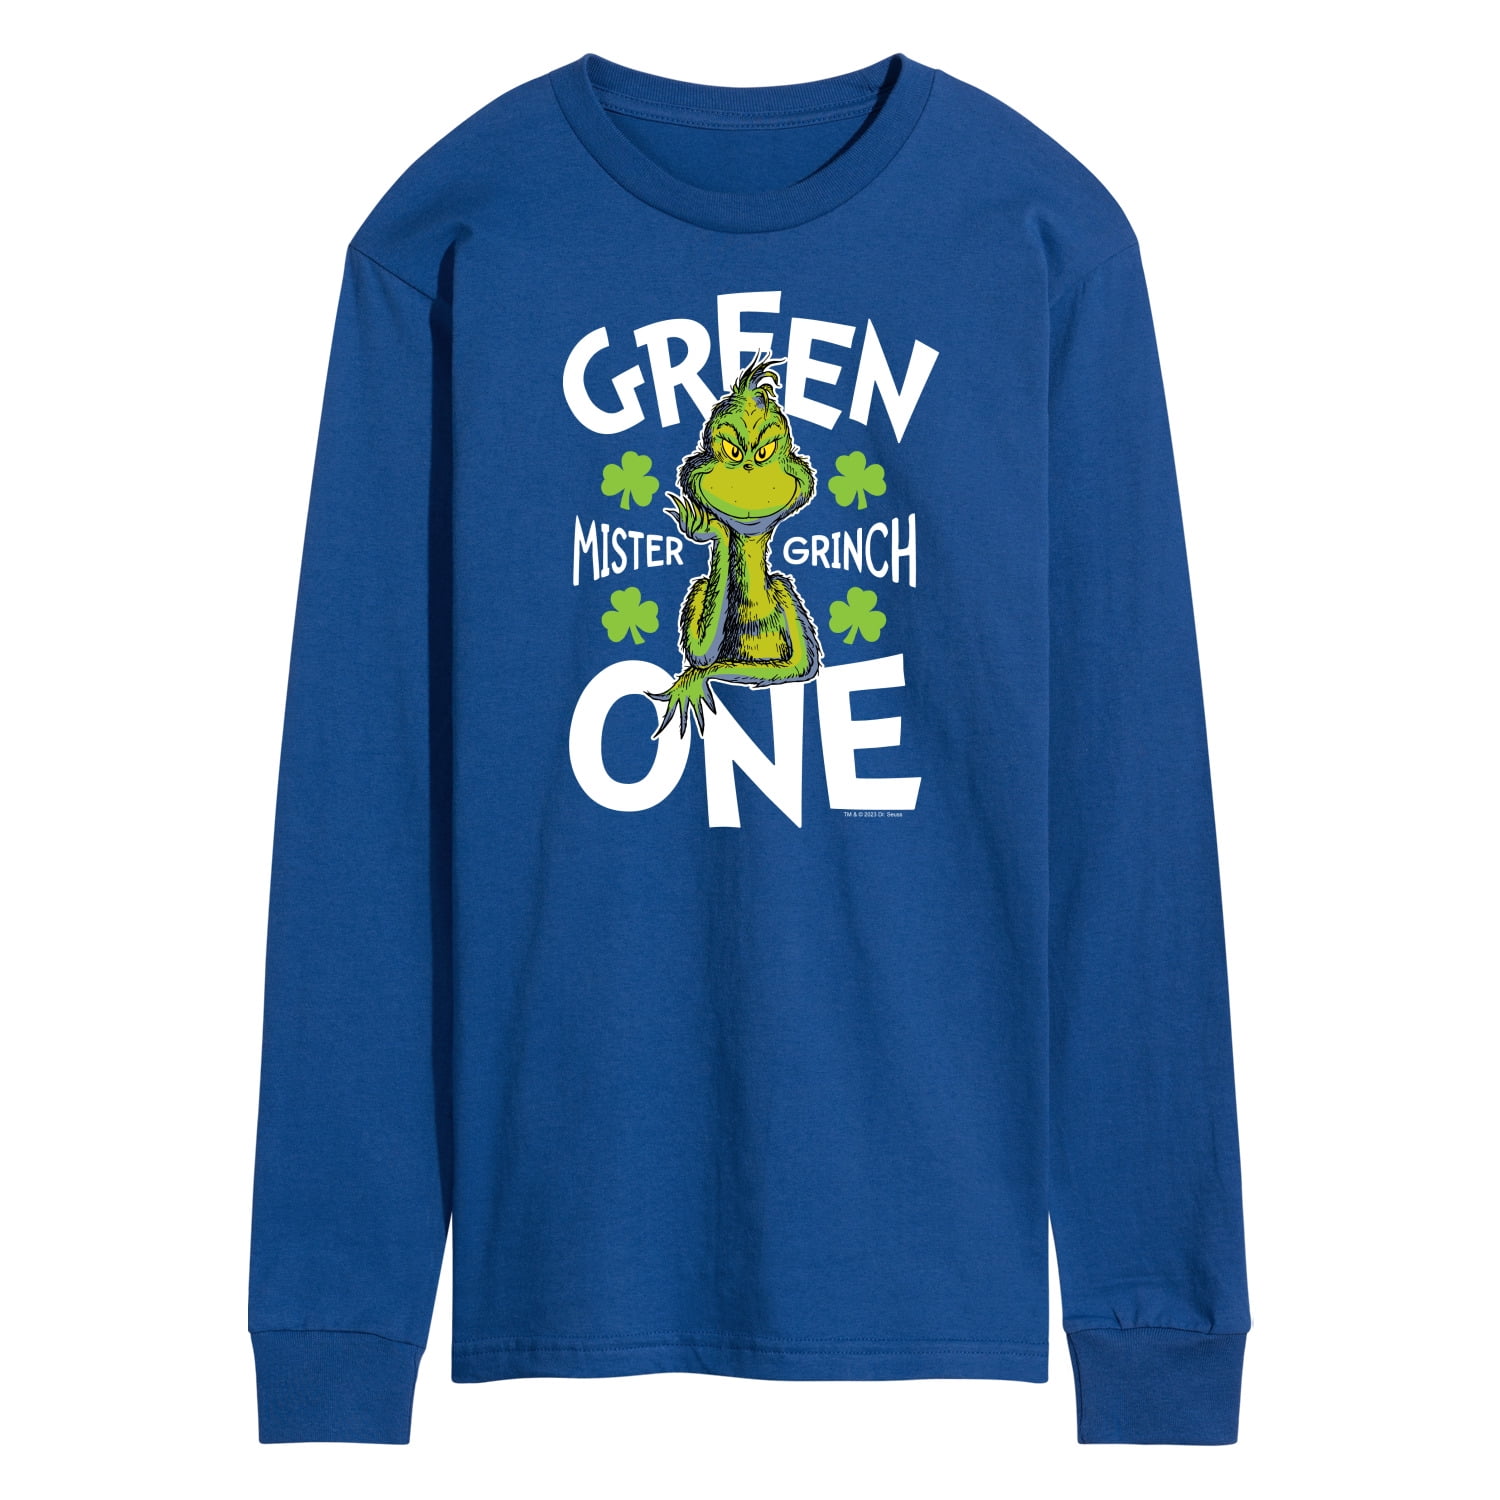 The Grinch - Green One - Men's Long Sleeve T-Shirt